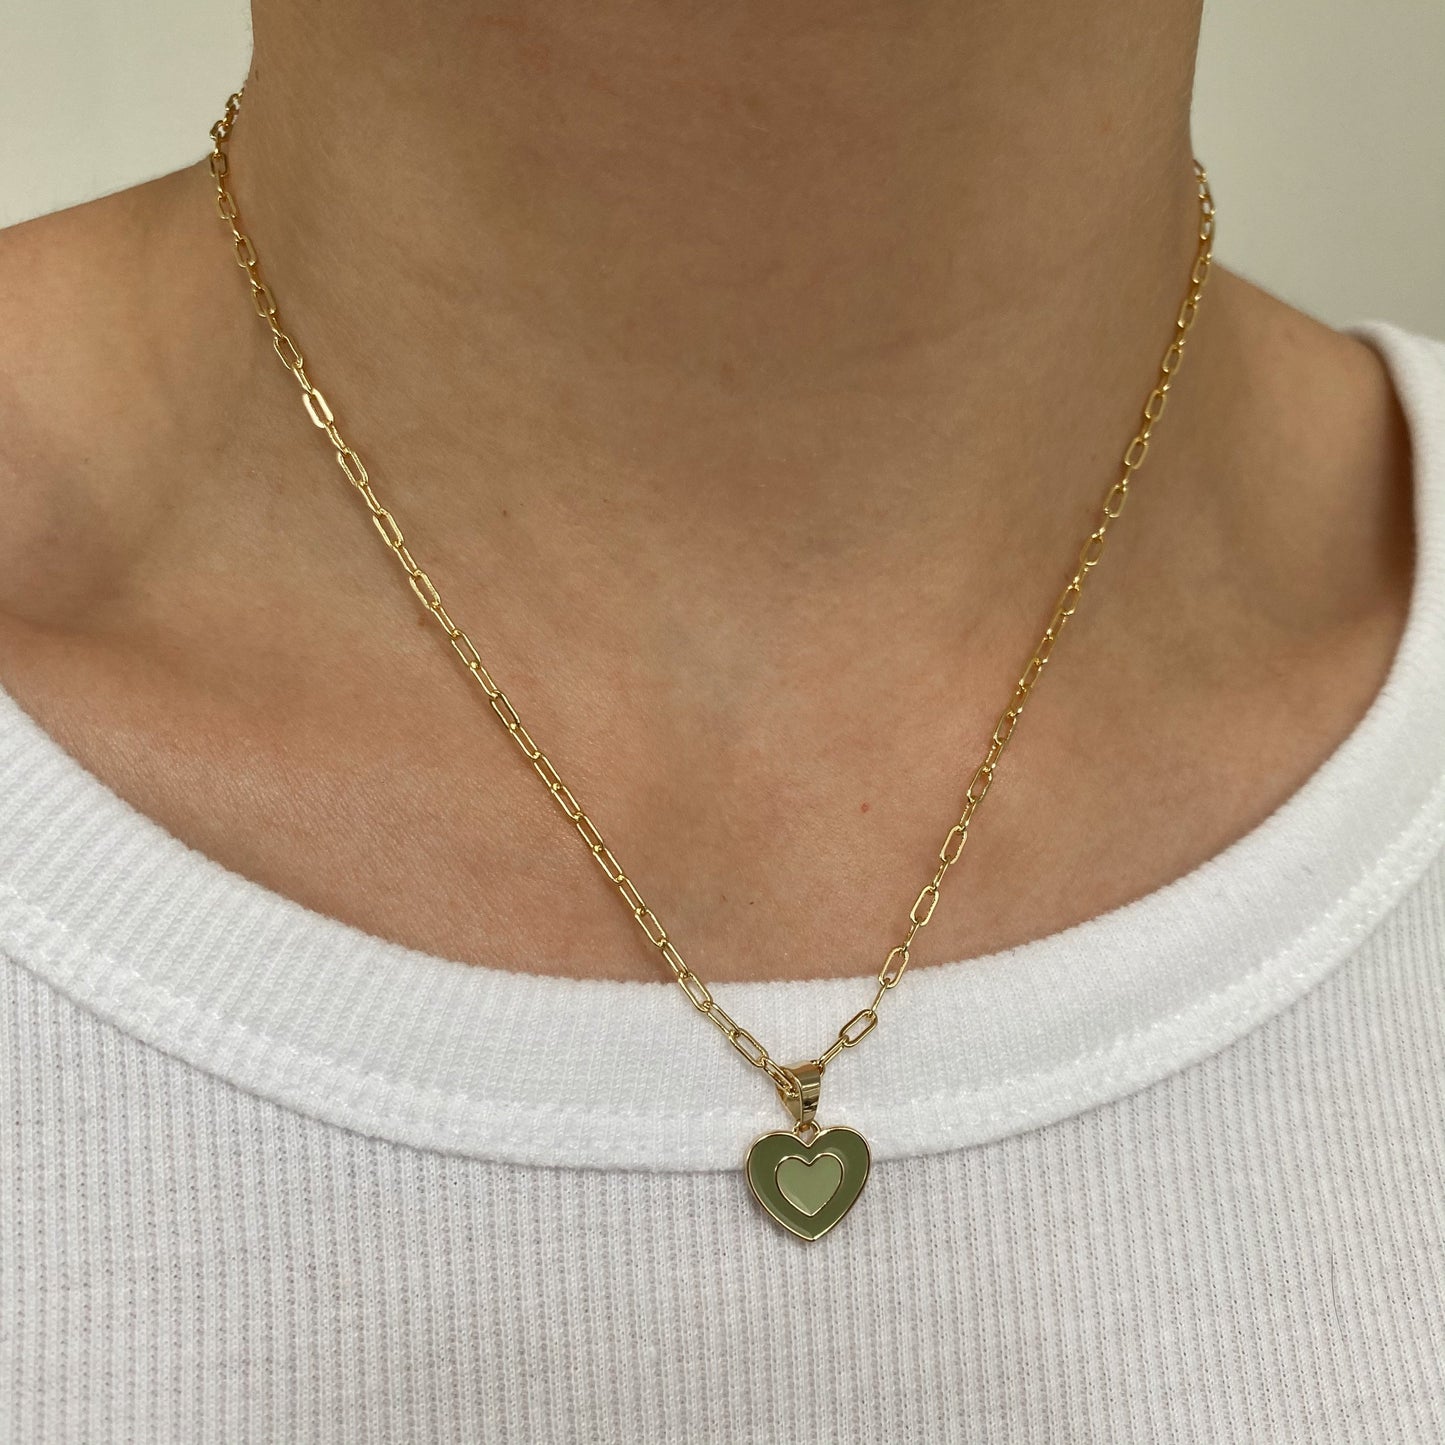 Love you so Matcha Necklace